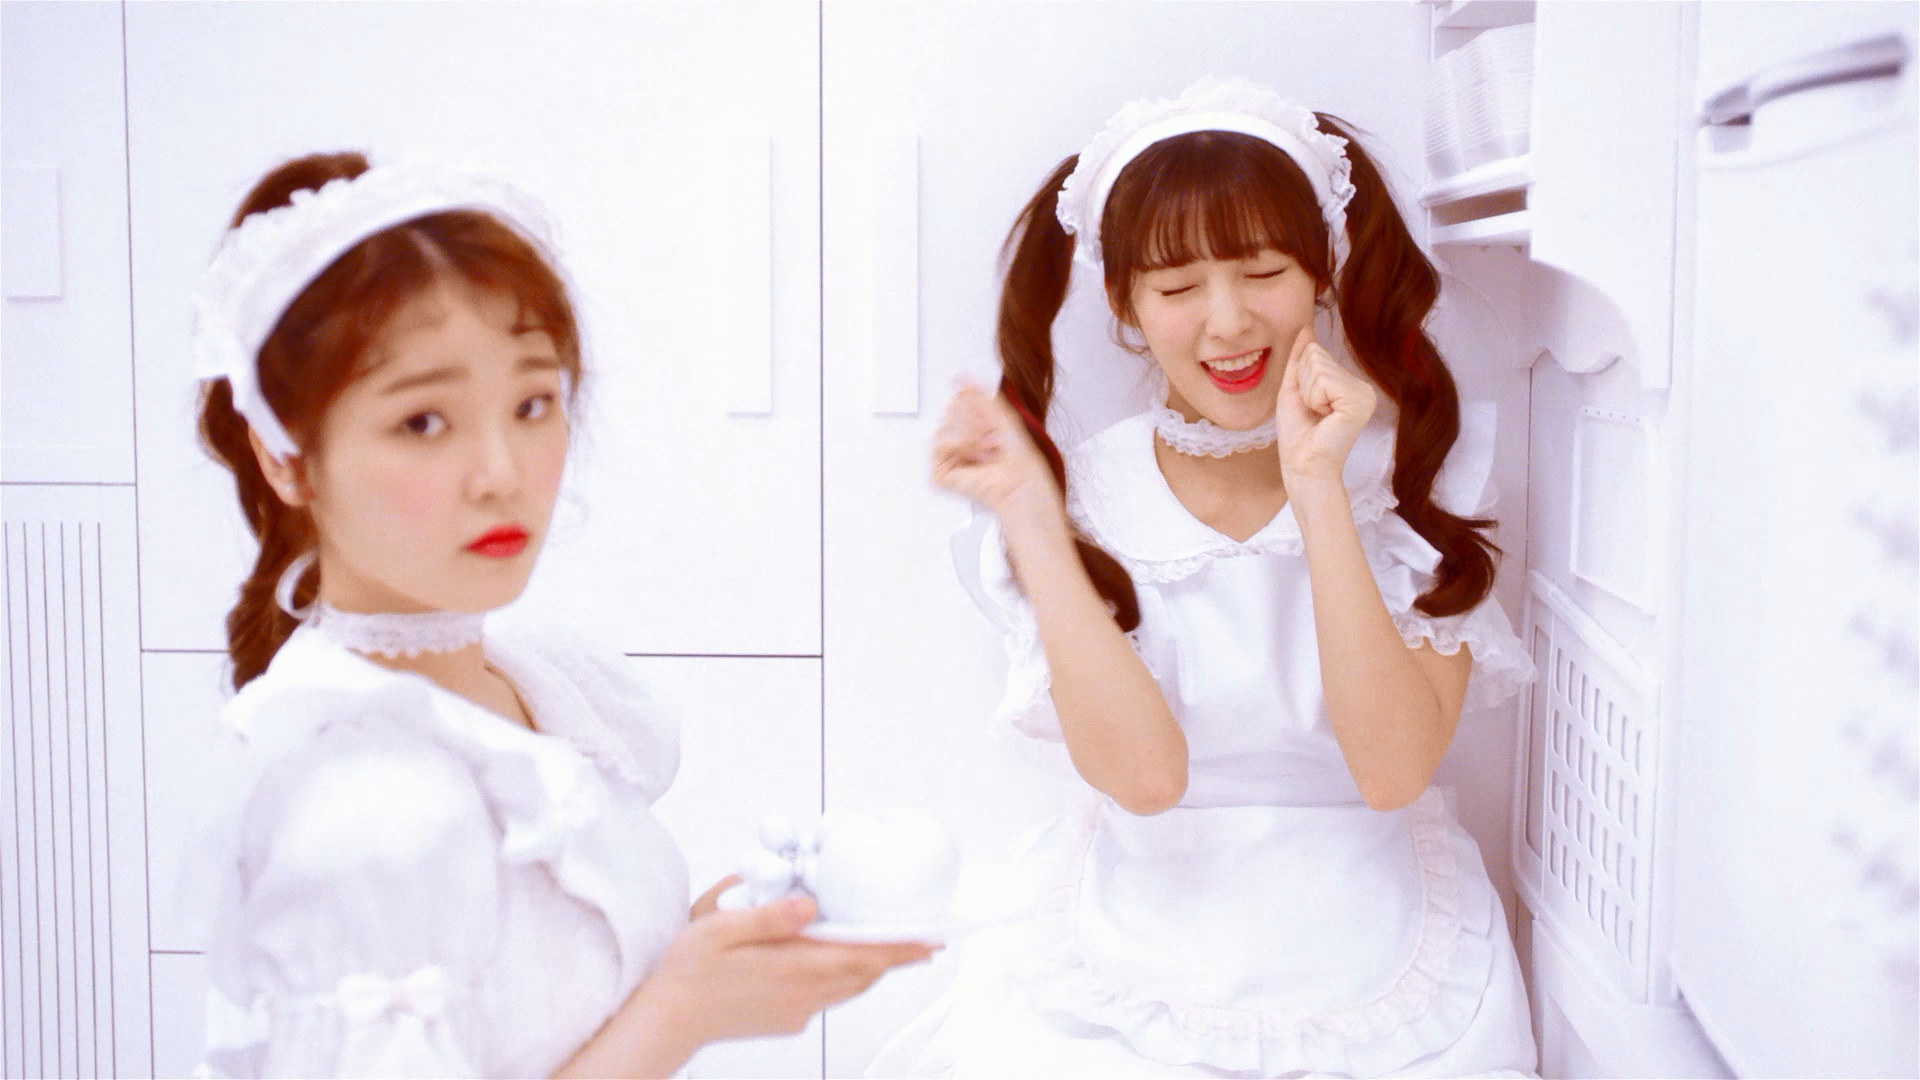 Oh My Girl - Coloring Book who's who - K-Pop Database / dbkpop.com